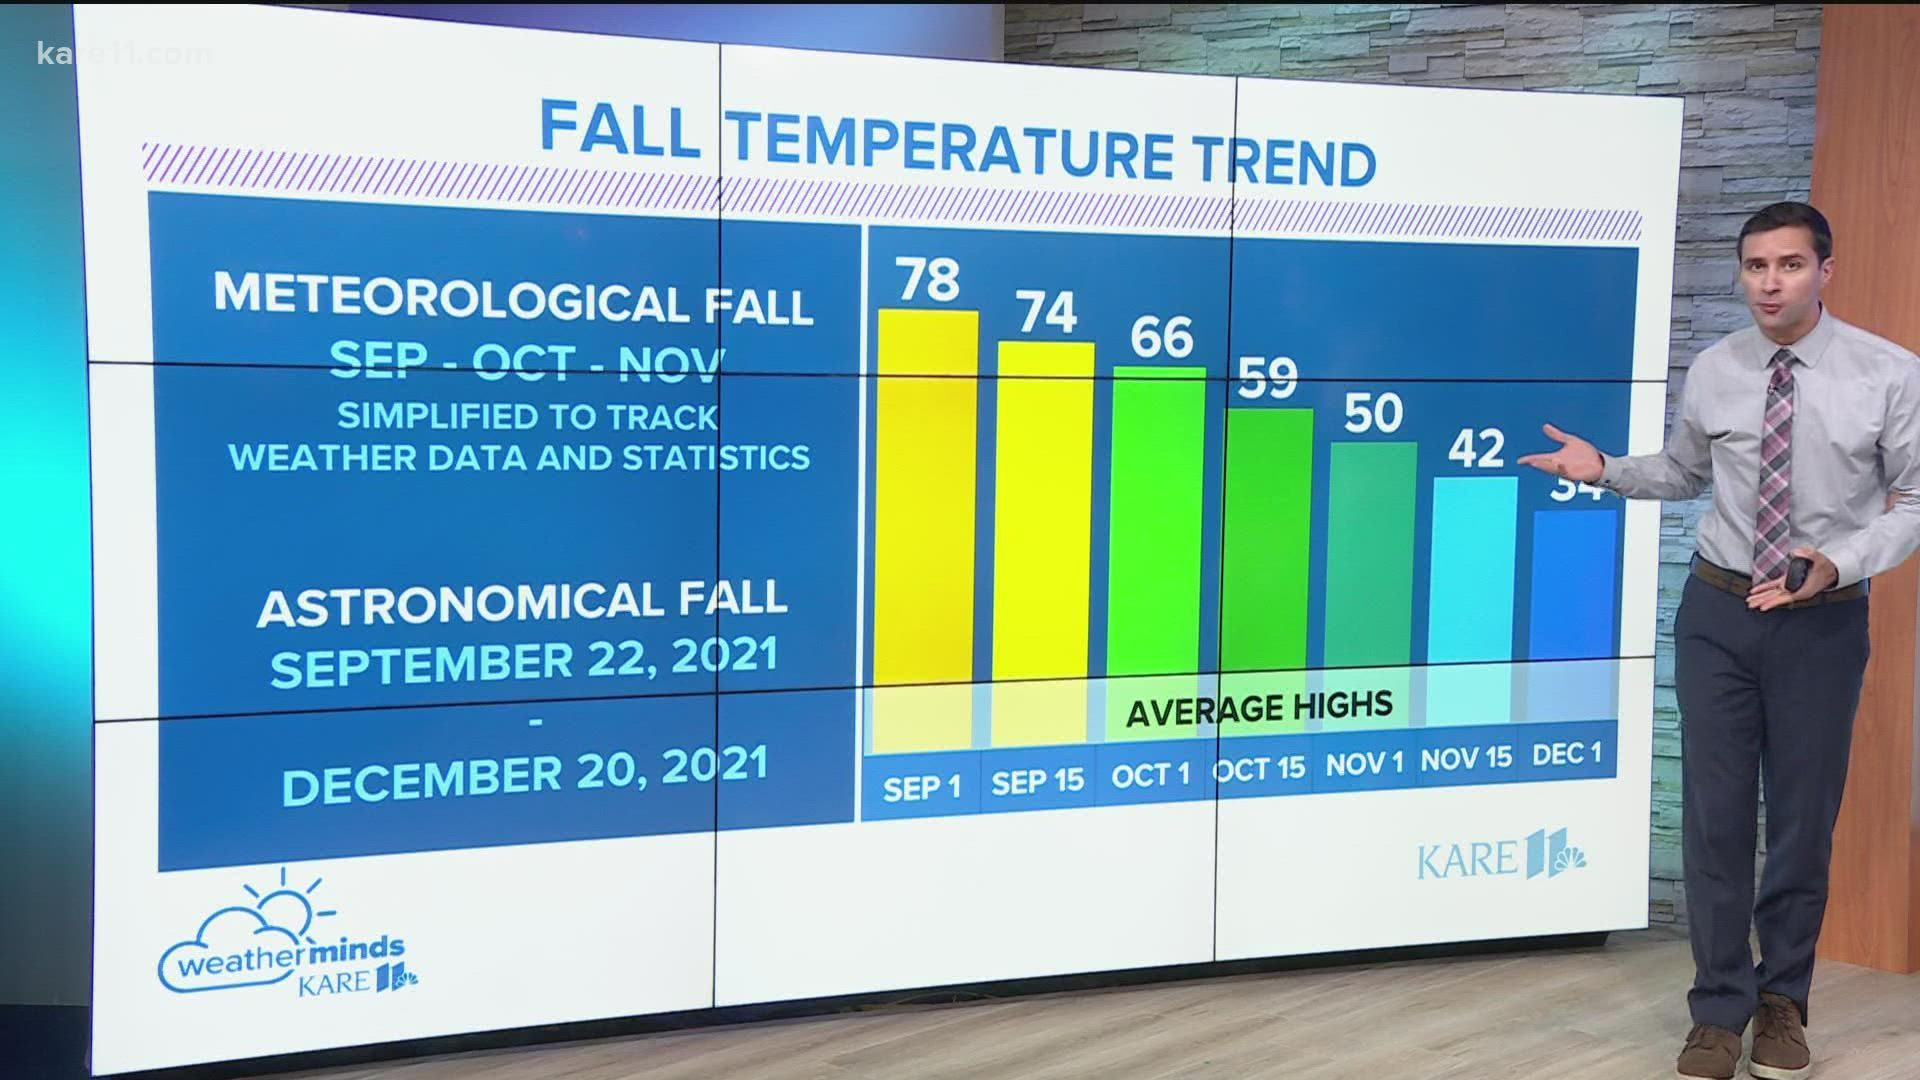 While meteorological fall begins Sept. 1, astronomical fall doesn't occur until Sept. 22.